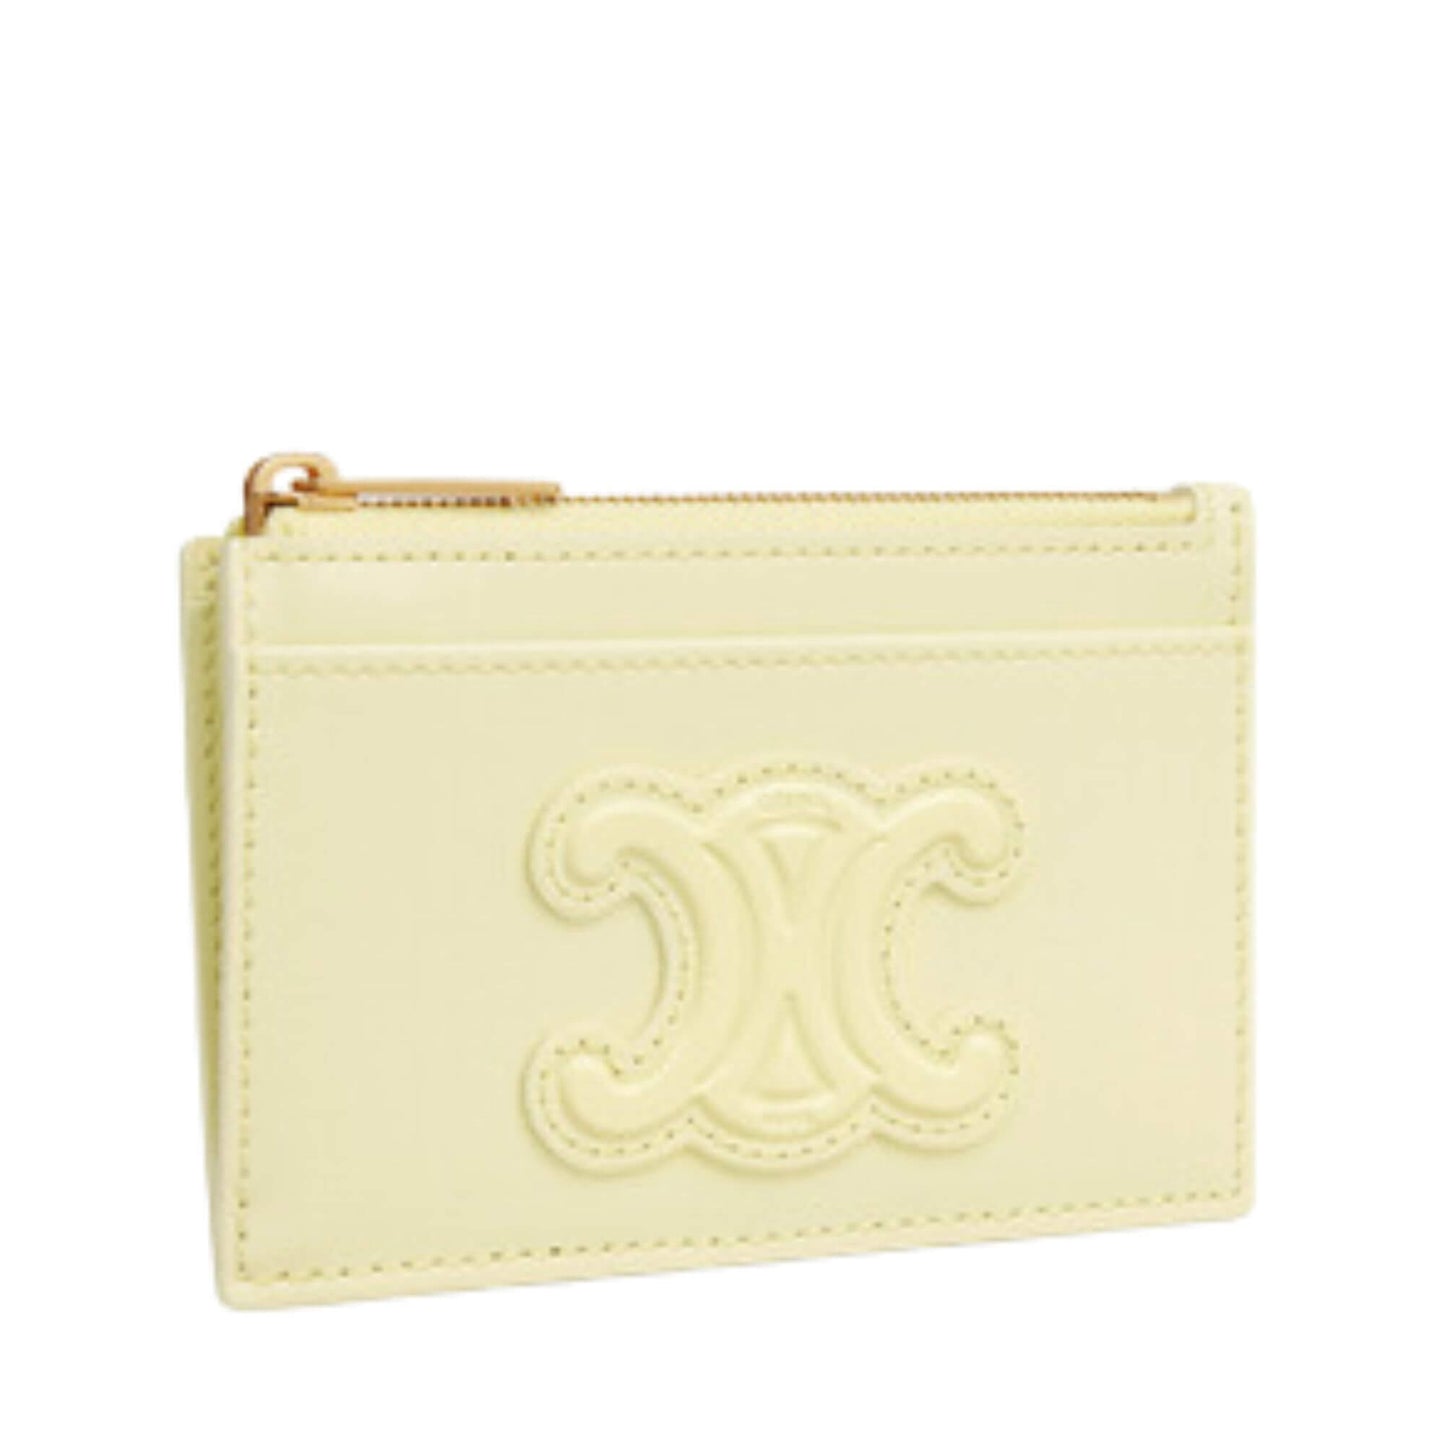 CELINE ZIPPED CARD HOLDER CUIR TRIOMPHE IN SHINY CALFSKIN LIGHT YELLOW